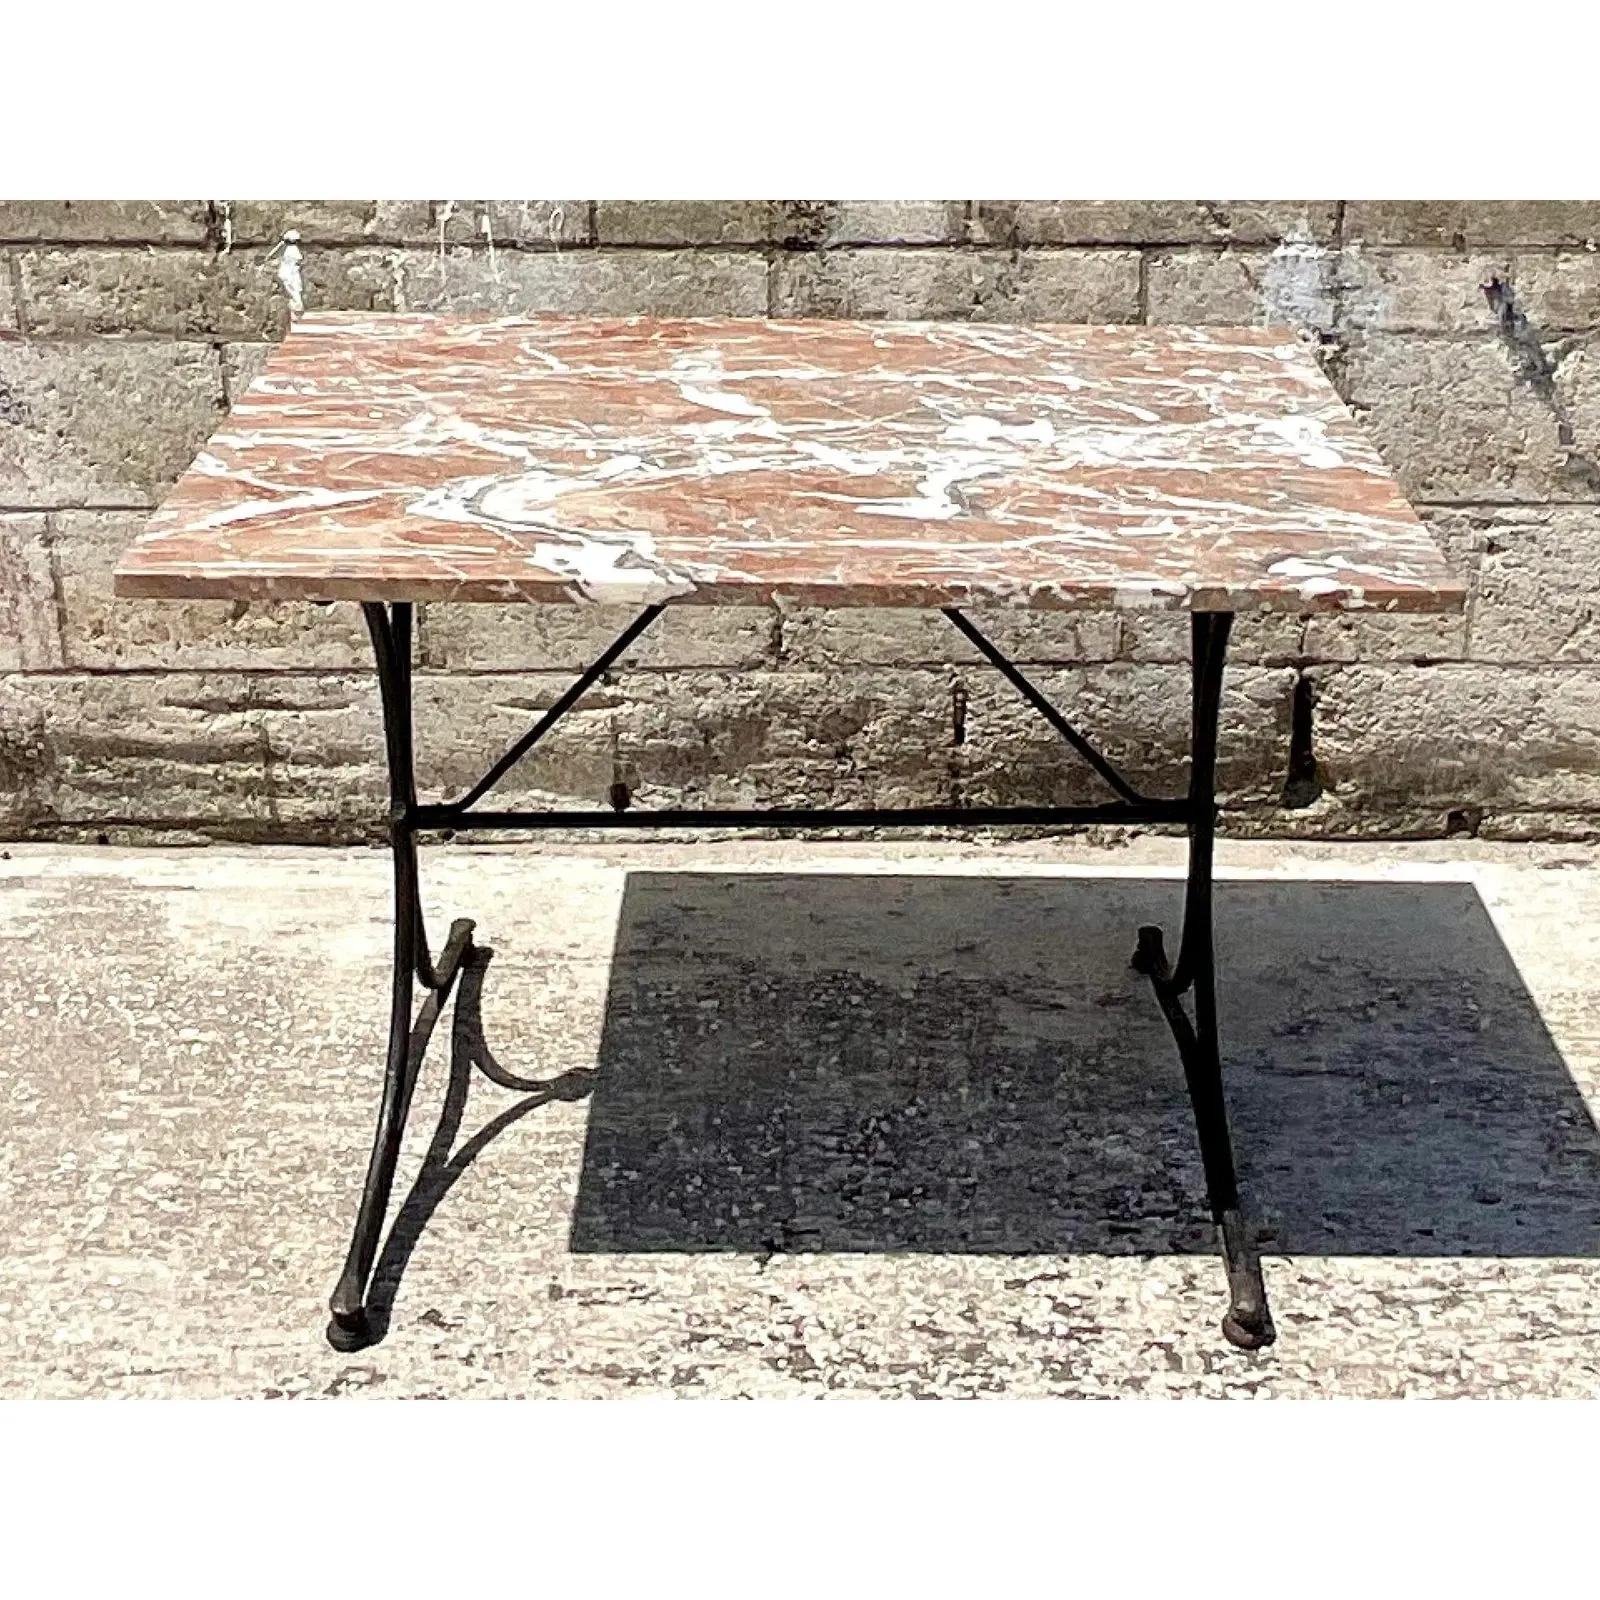 A fantastic vintage Regency dining table. Beautiful rust colored marble on a black wrought iron base. Acquired from a Palm Beach estate.